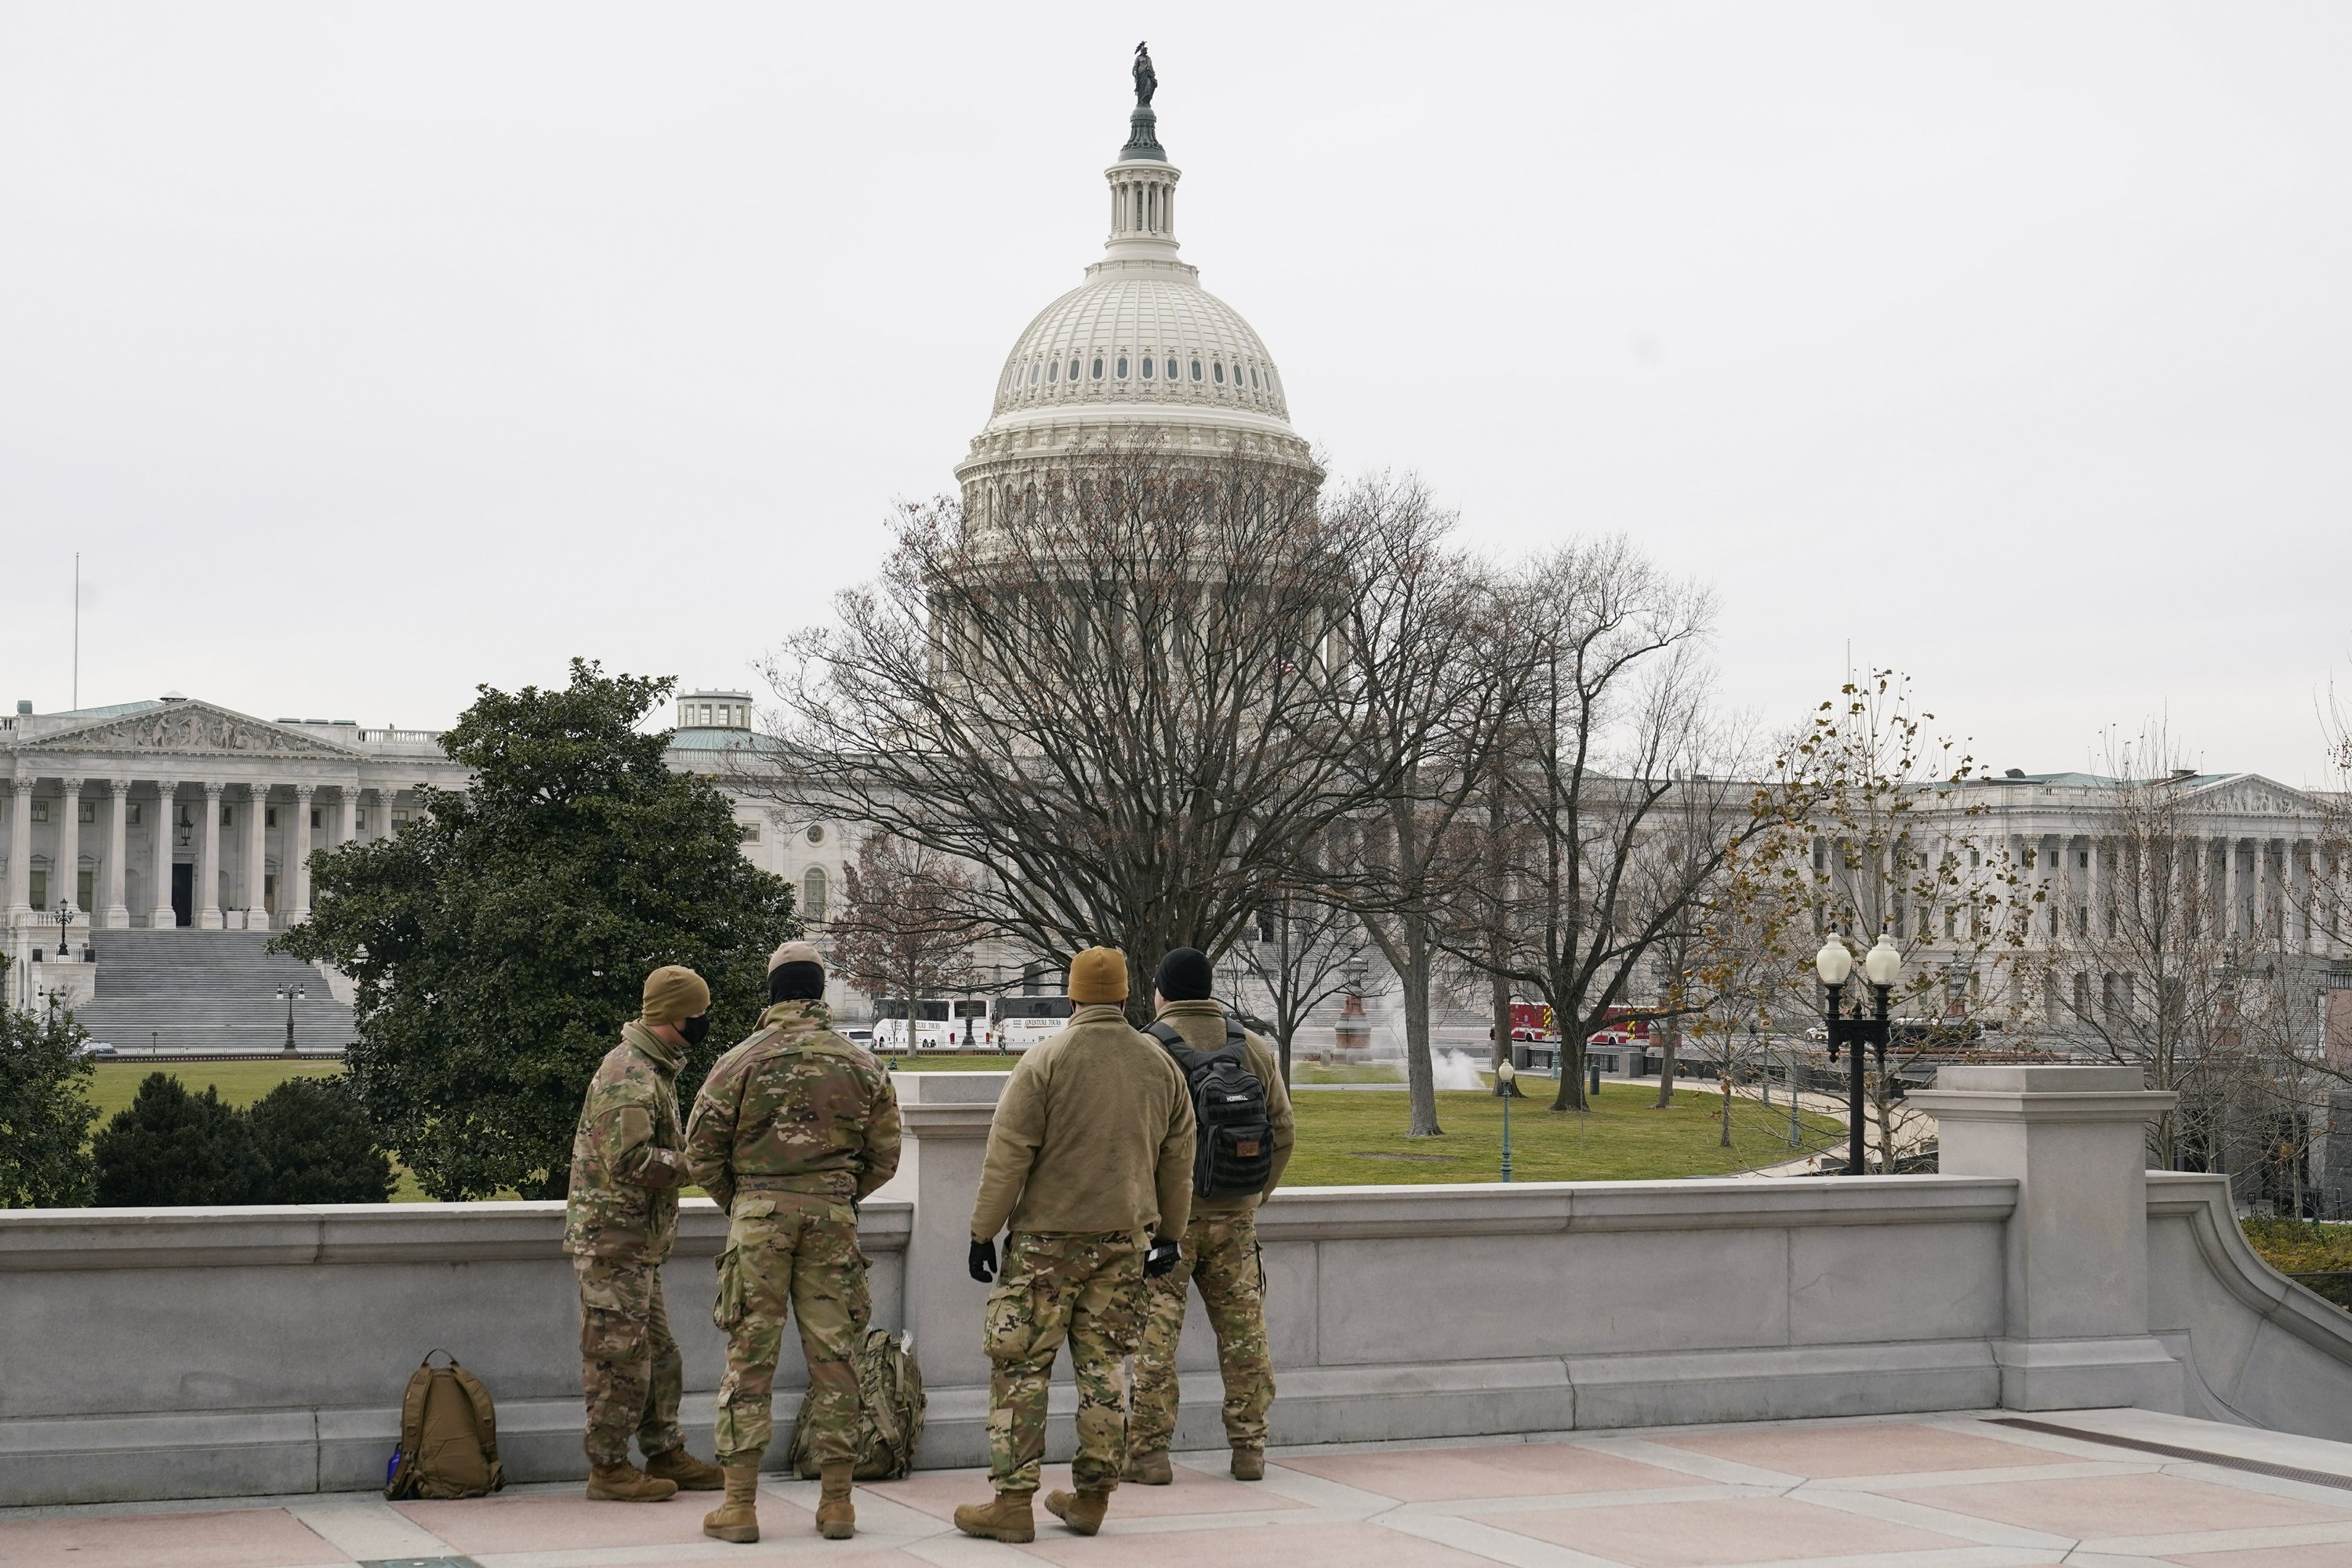 The army chief says Nat. The guard may be allowed to carry weapons in DC